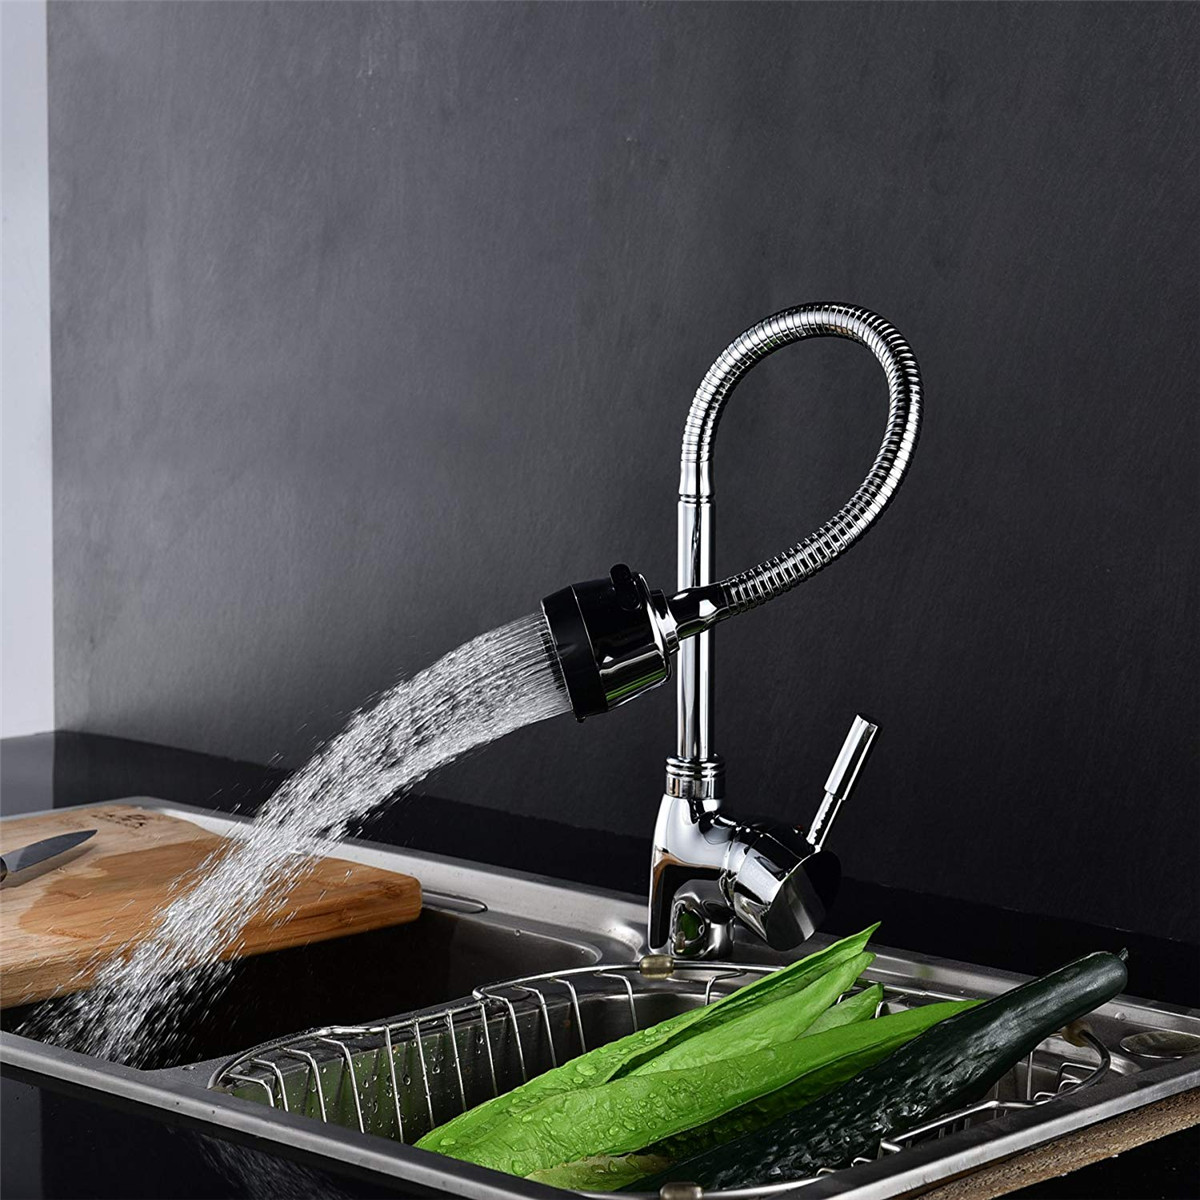 Kitchen-Bathroom-Spout-Faucet-360deg-Rotate-Pull-out-Sprayer-Hot-Cold-Water-Mixer-Tap-1379768